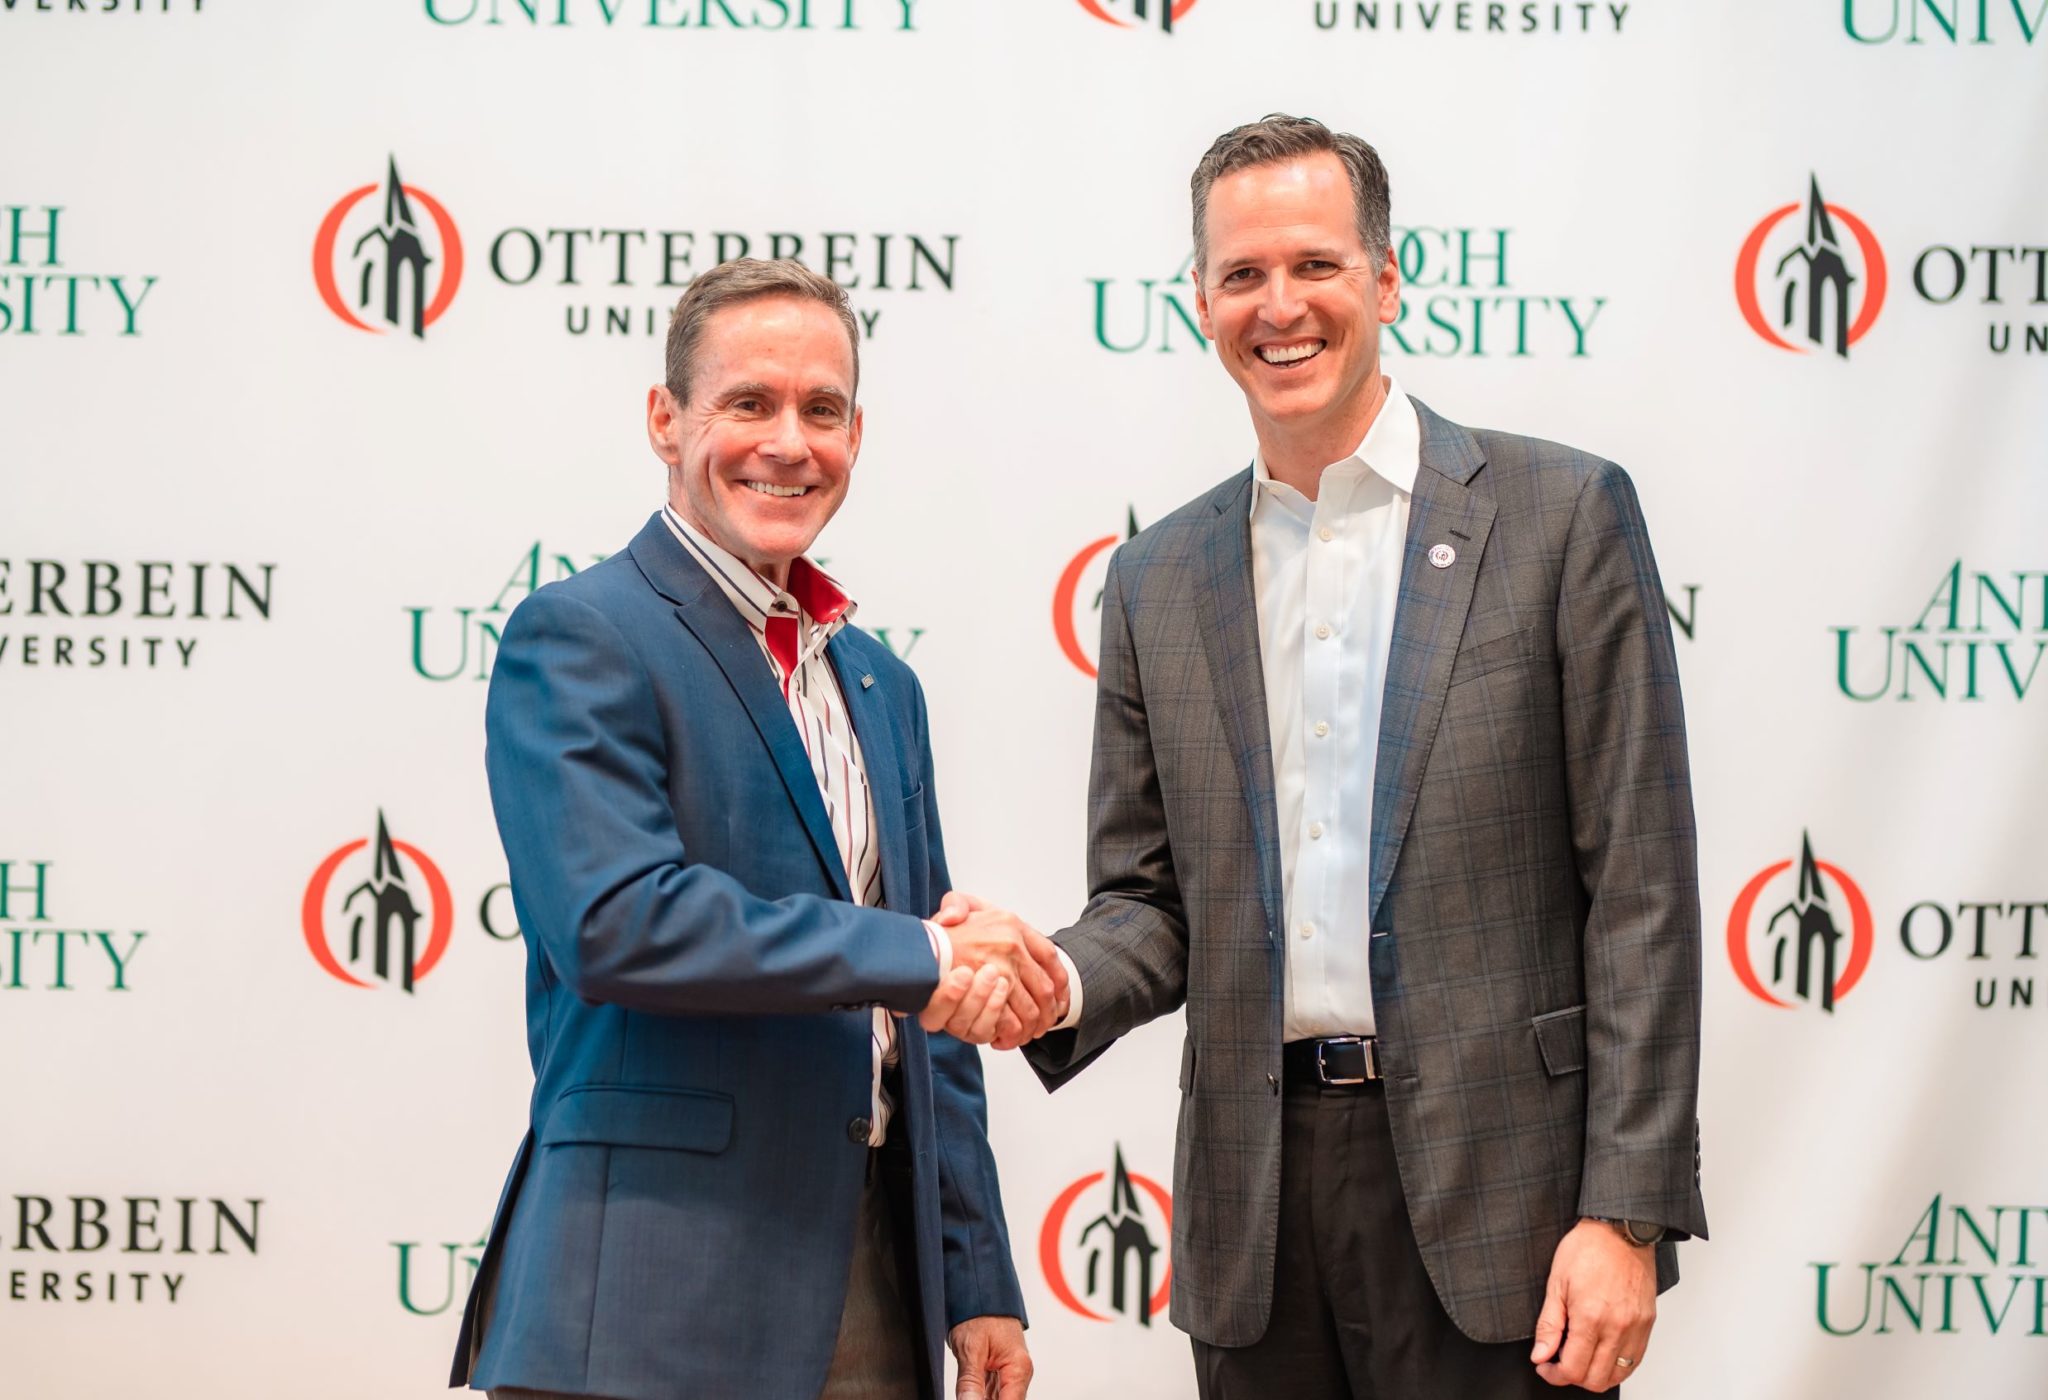 Antioch Plans Affiliation With Otterbein to Create First-of-Its-Kind System